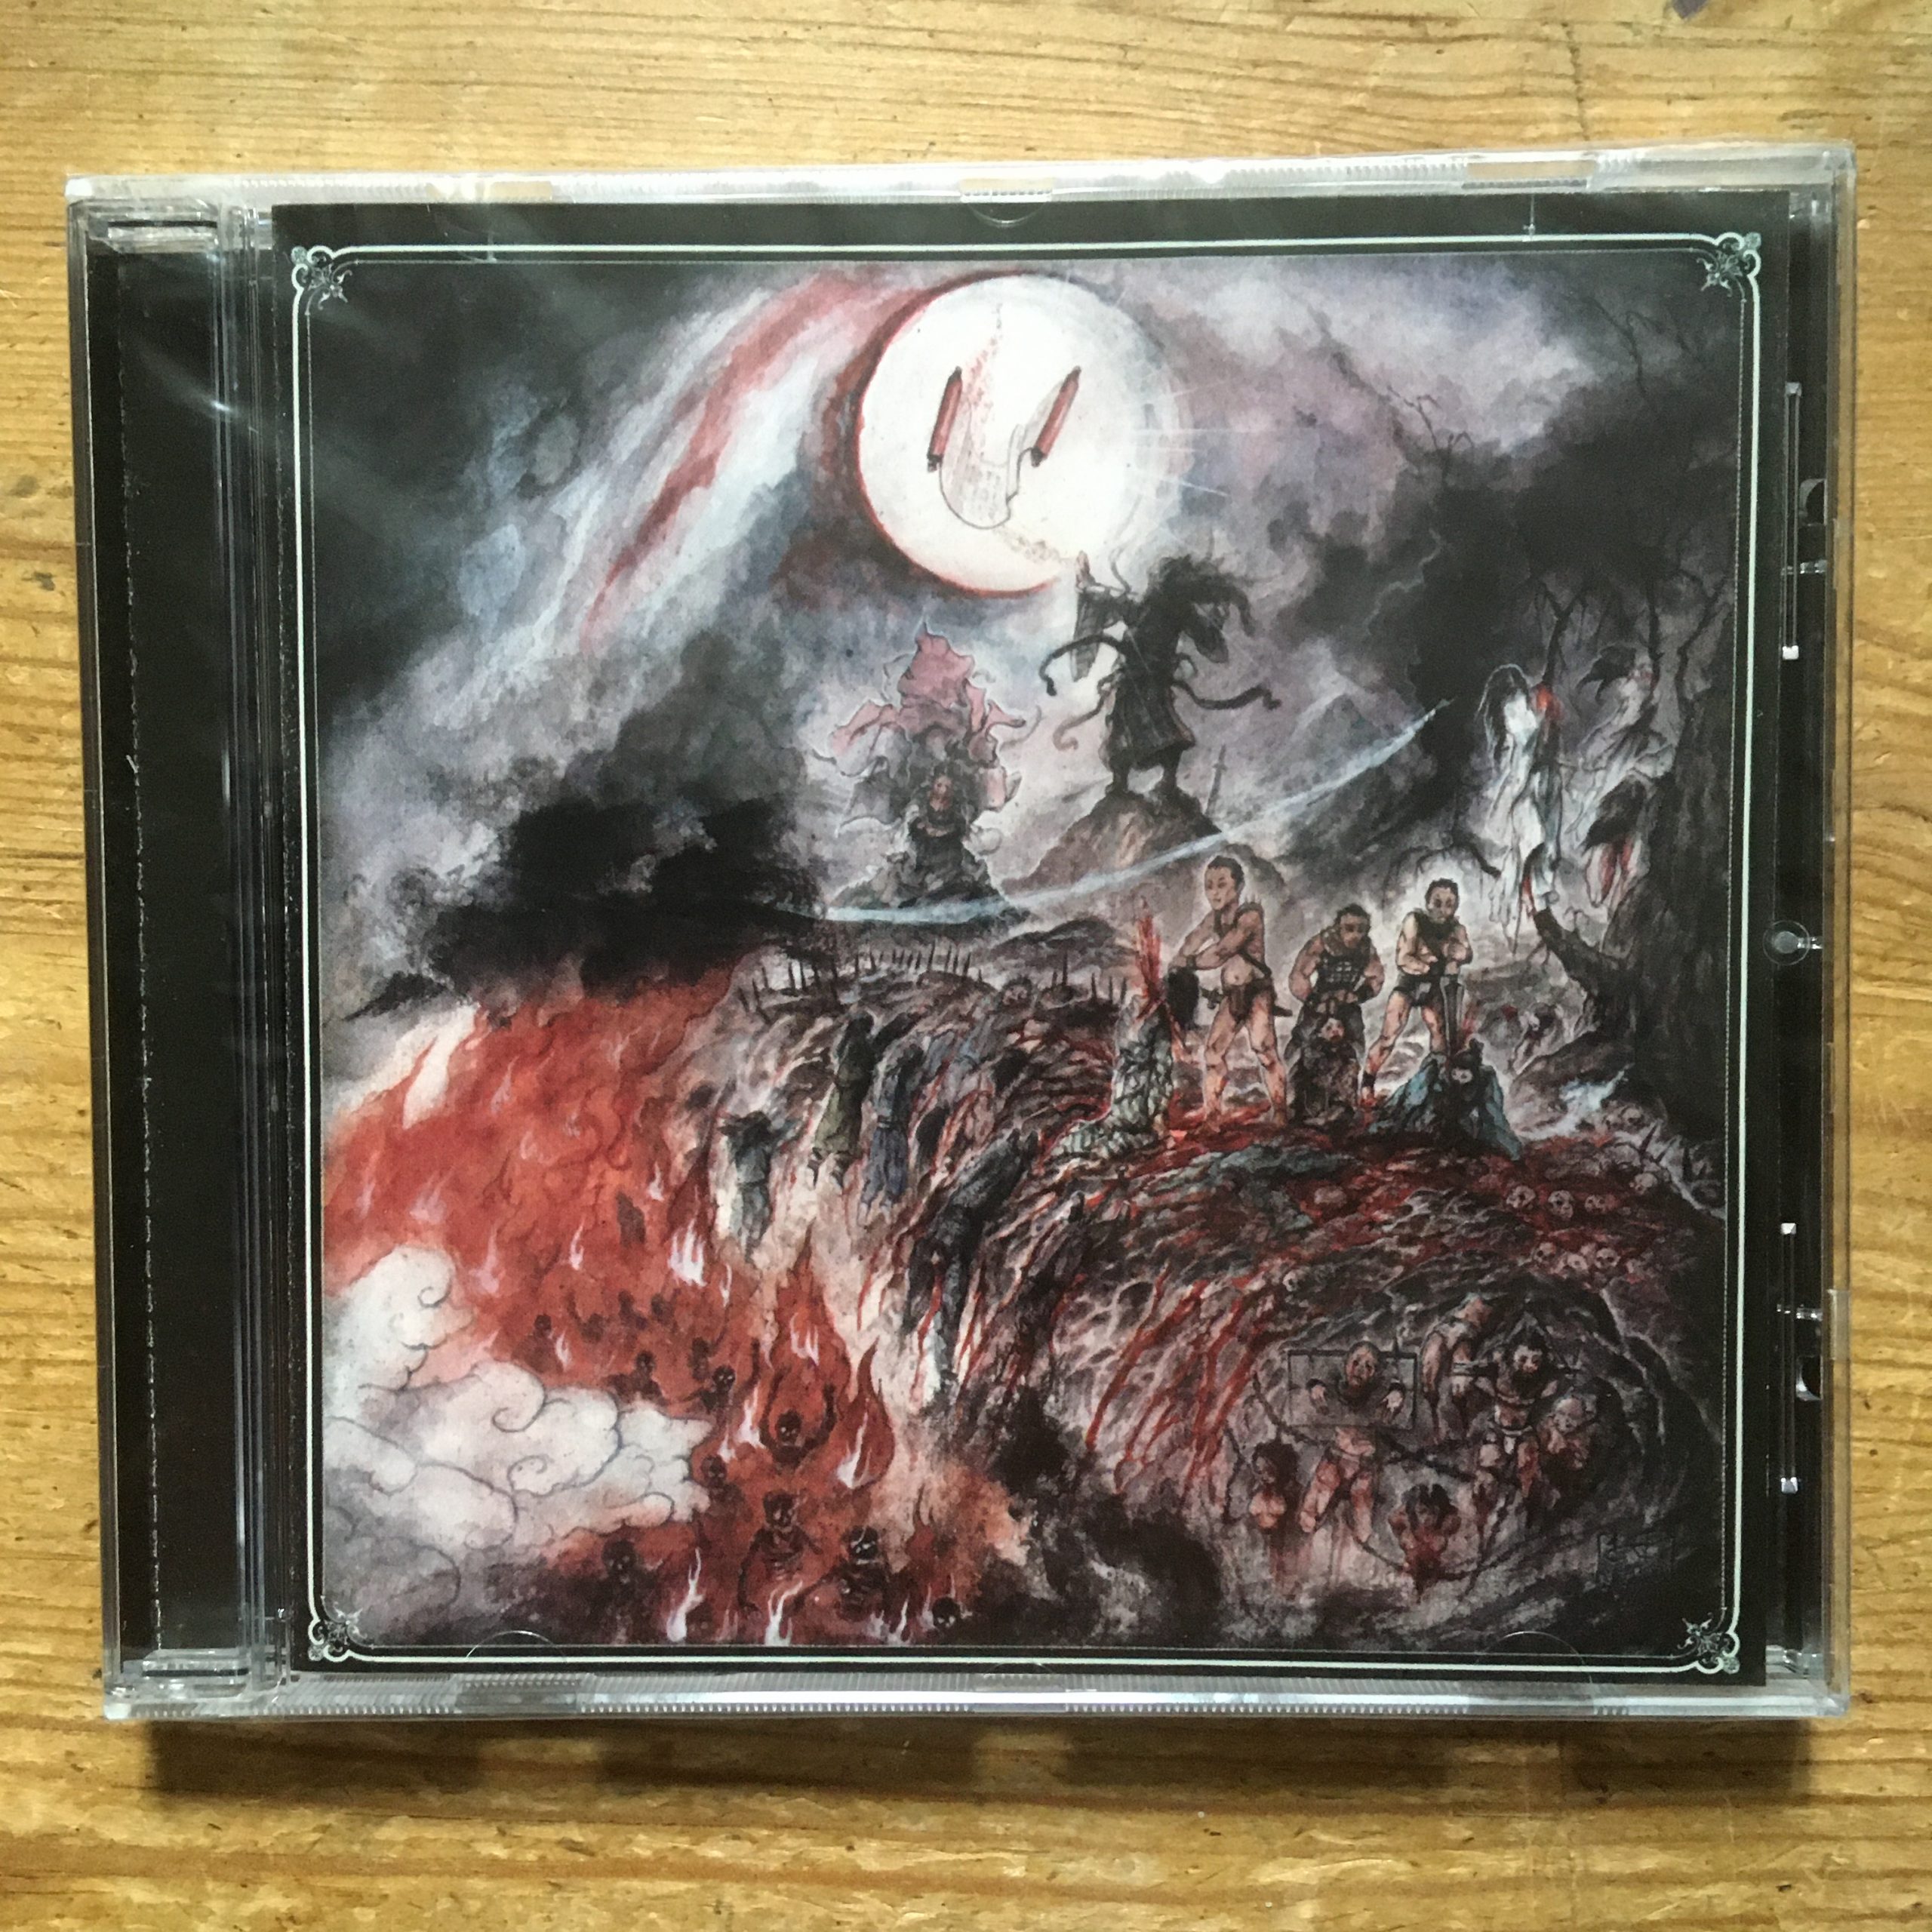 Photo of the Ripped to Shreds - "魔經 - Demon Scriptures" CD